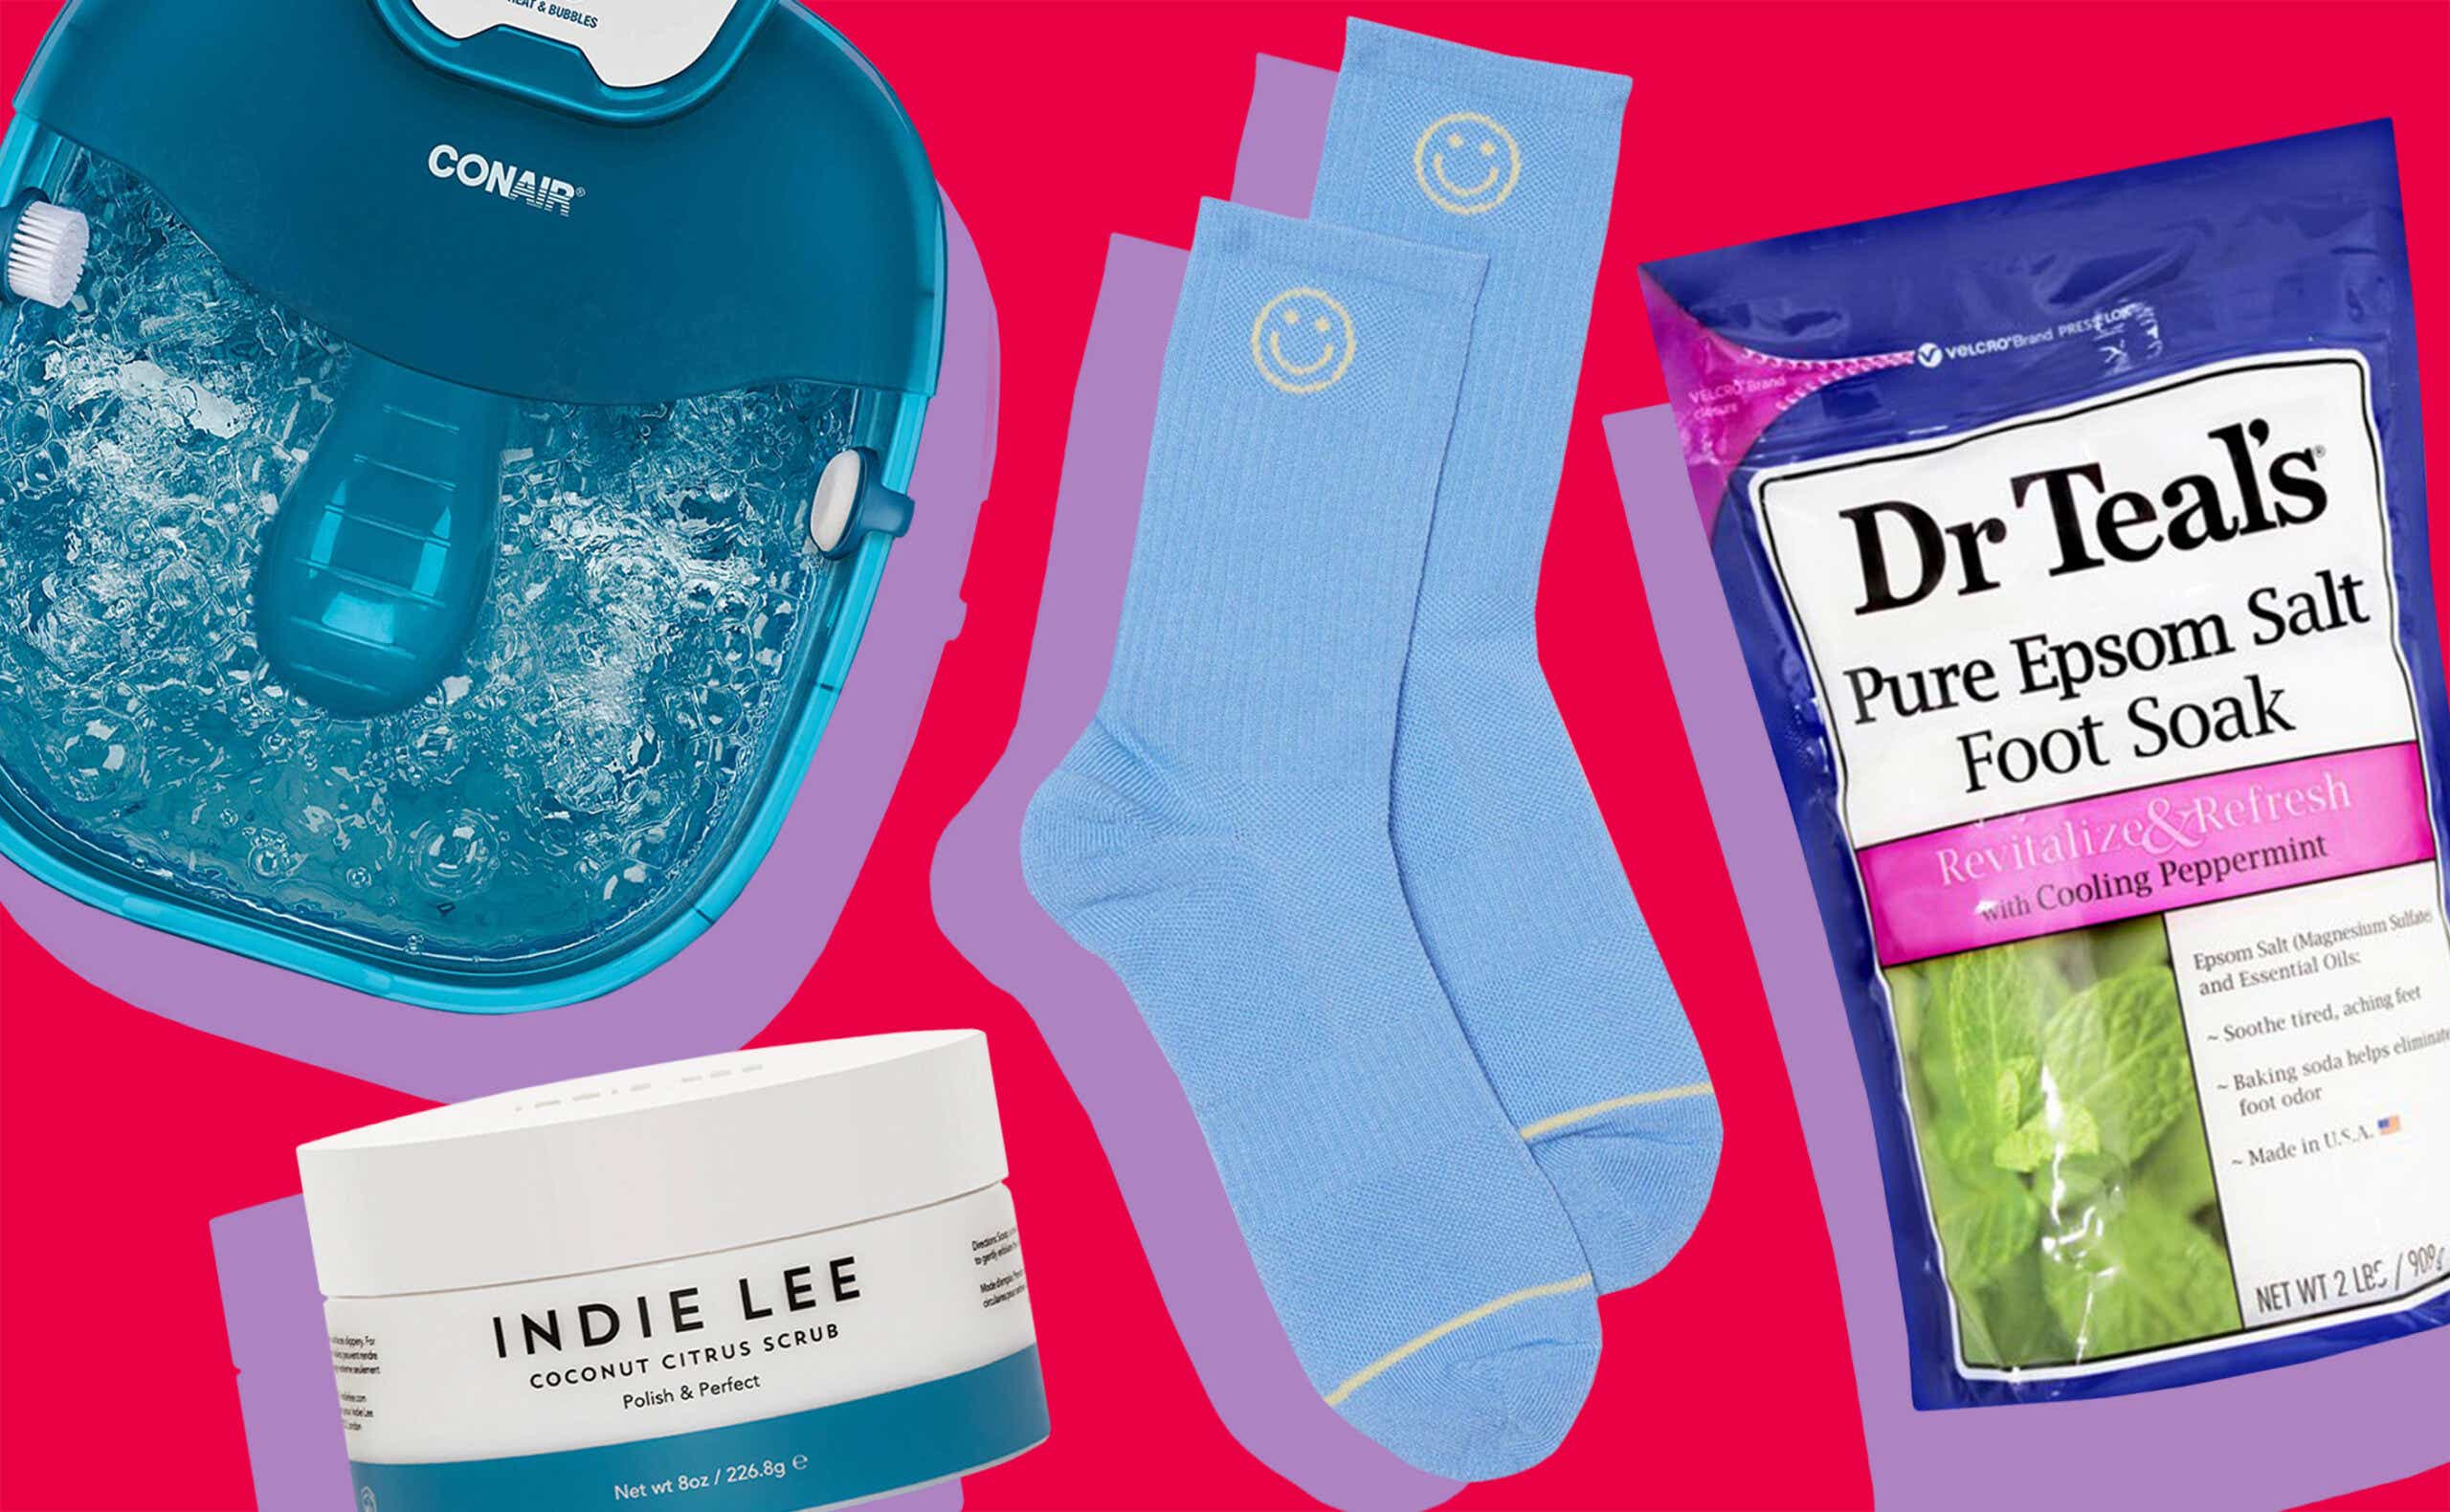 Don't feel like getting a pedicure? Make these simple feet scrubs at home  instead